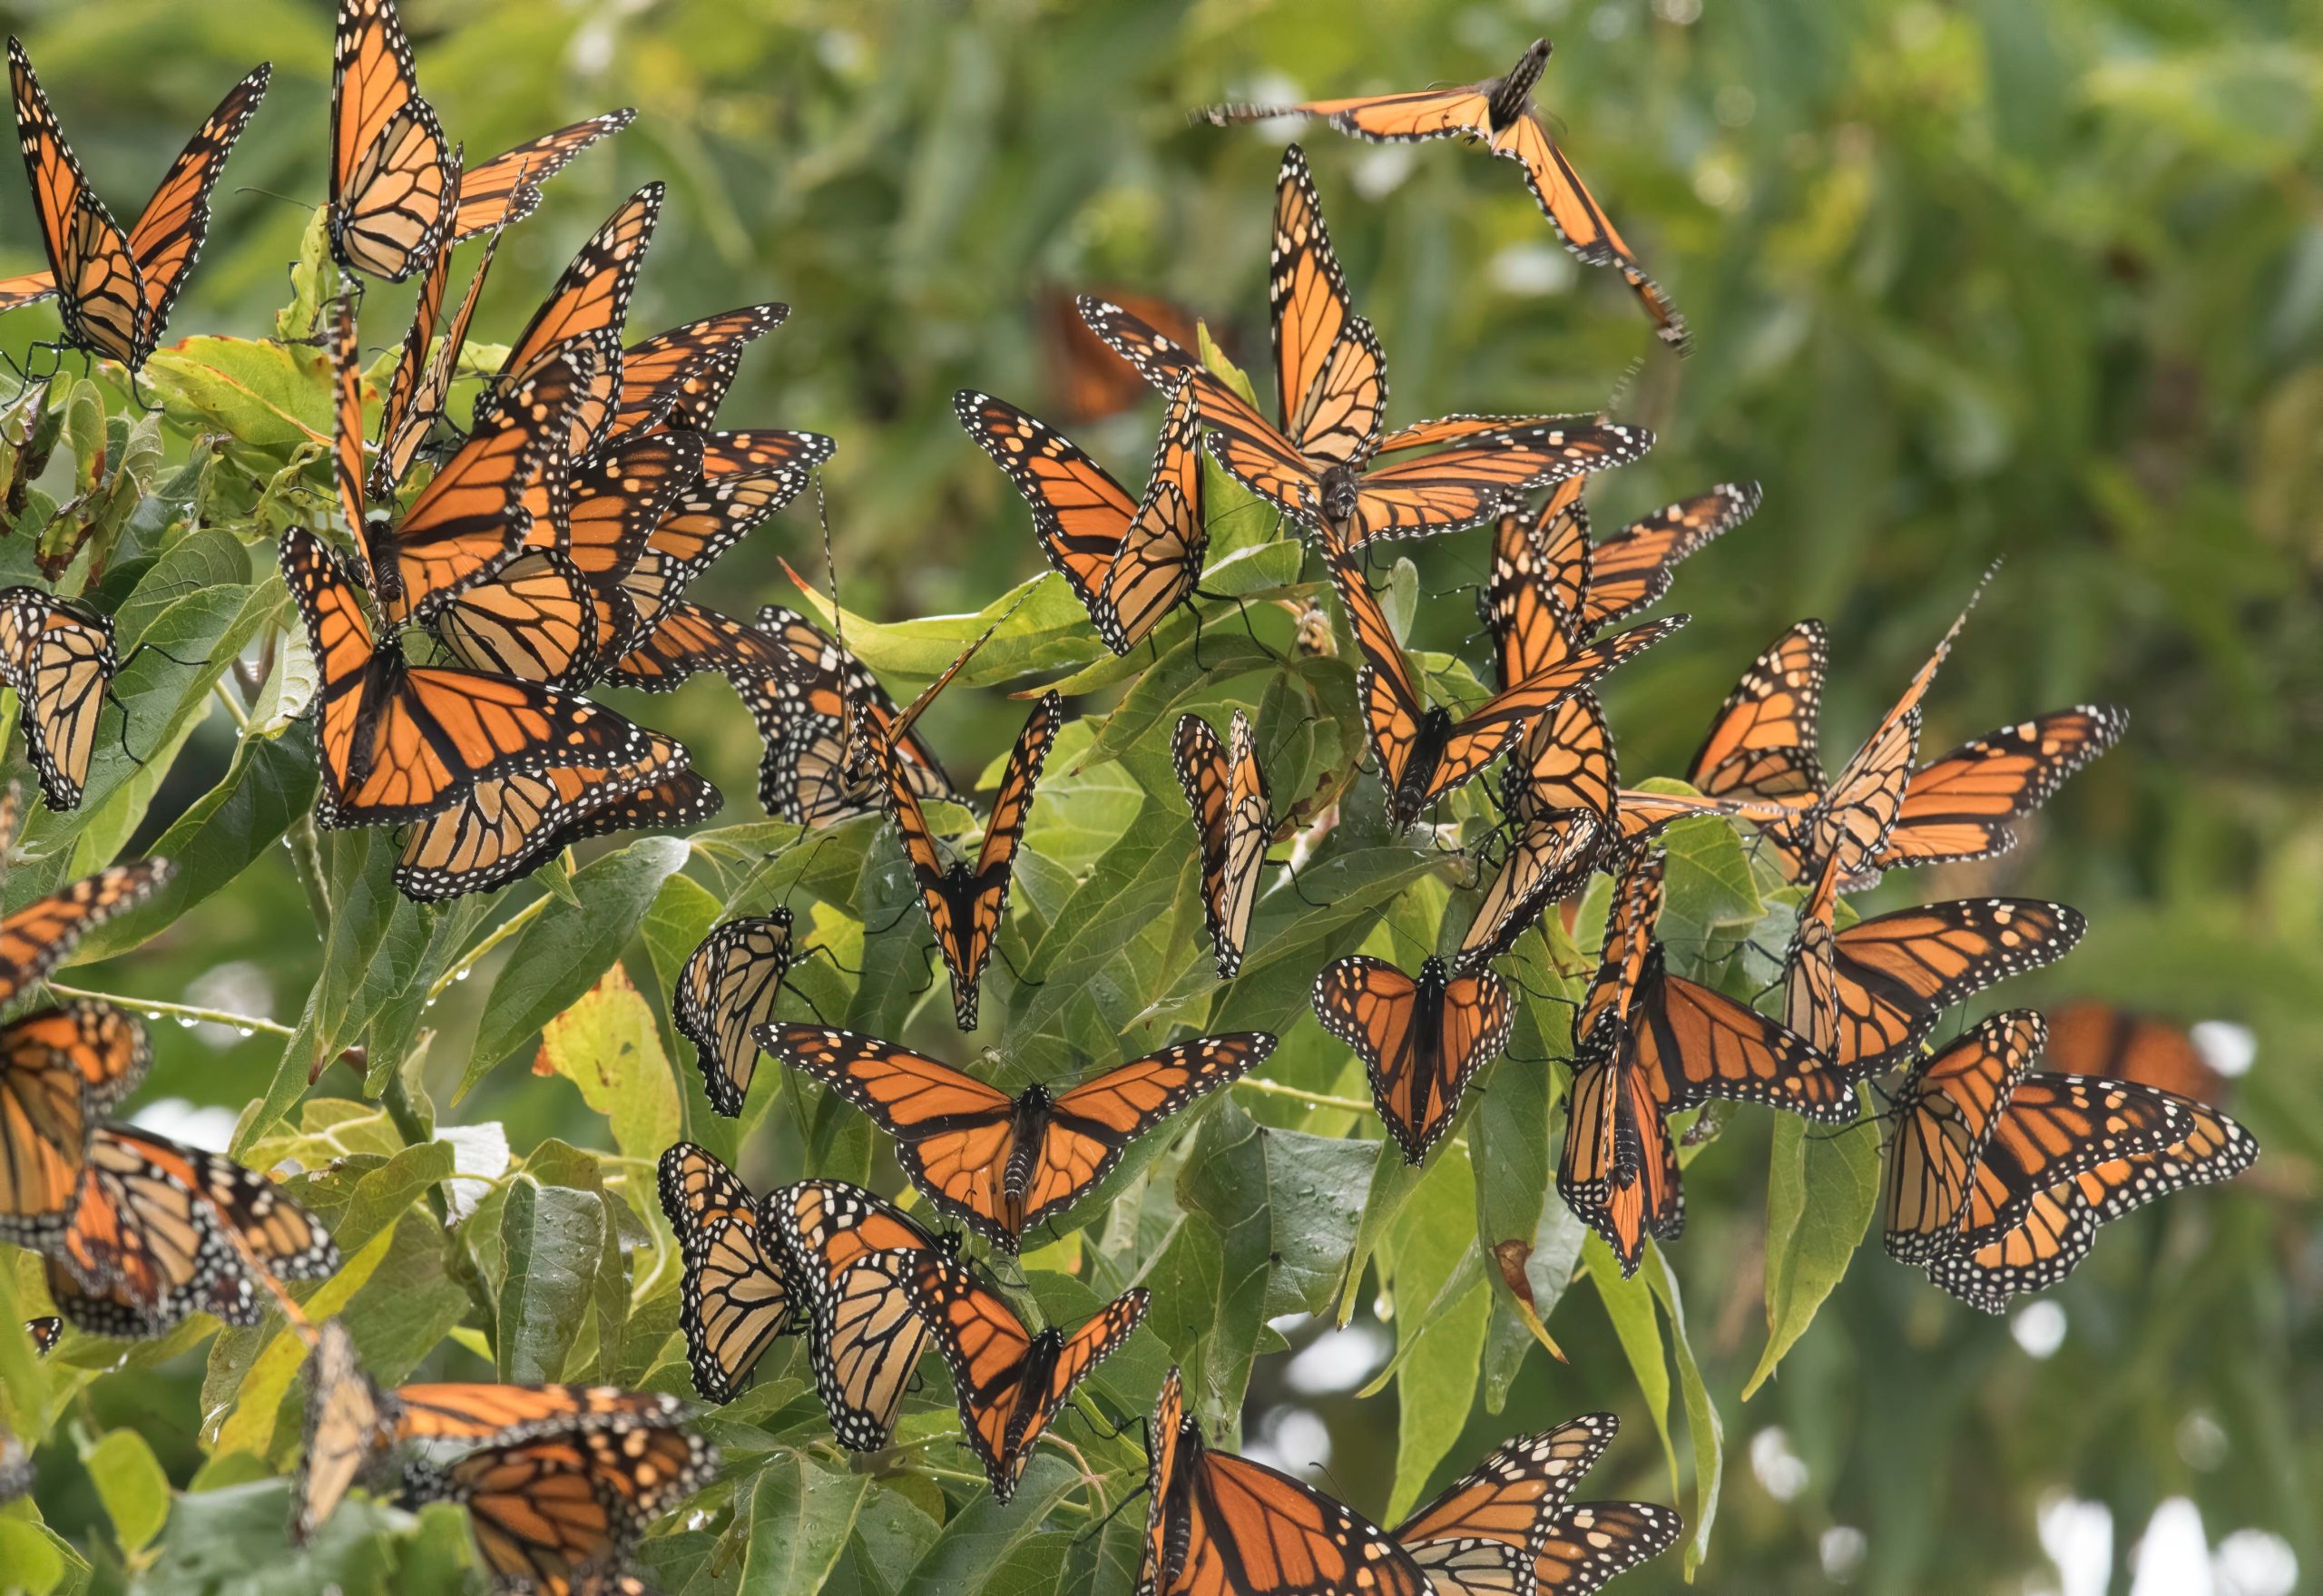 Monitoring And Observing Monarch Butterflies In Your Garden